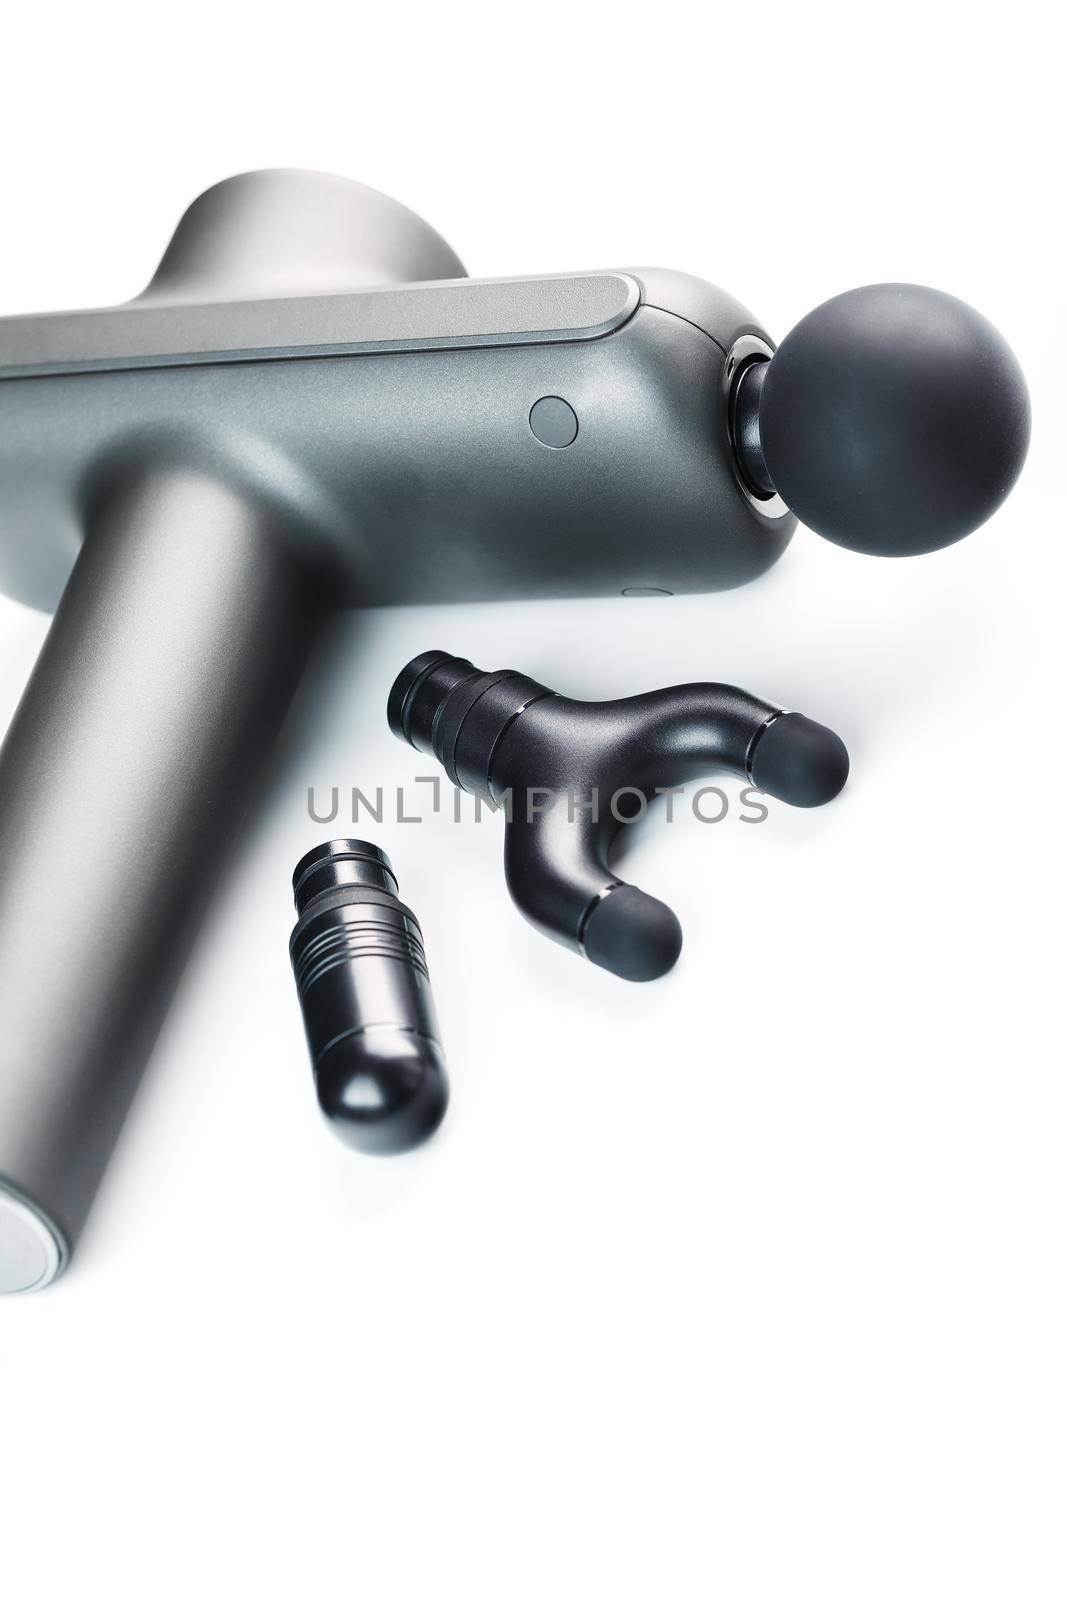 Electric body massager with various attachments on a white background. by AlexGrec